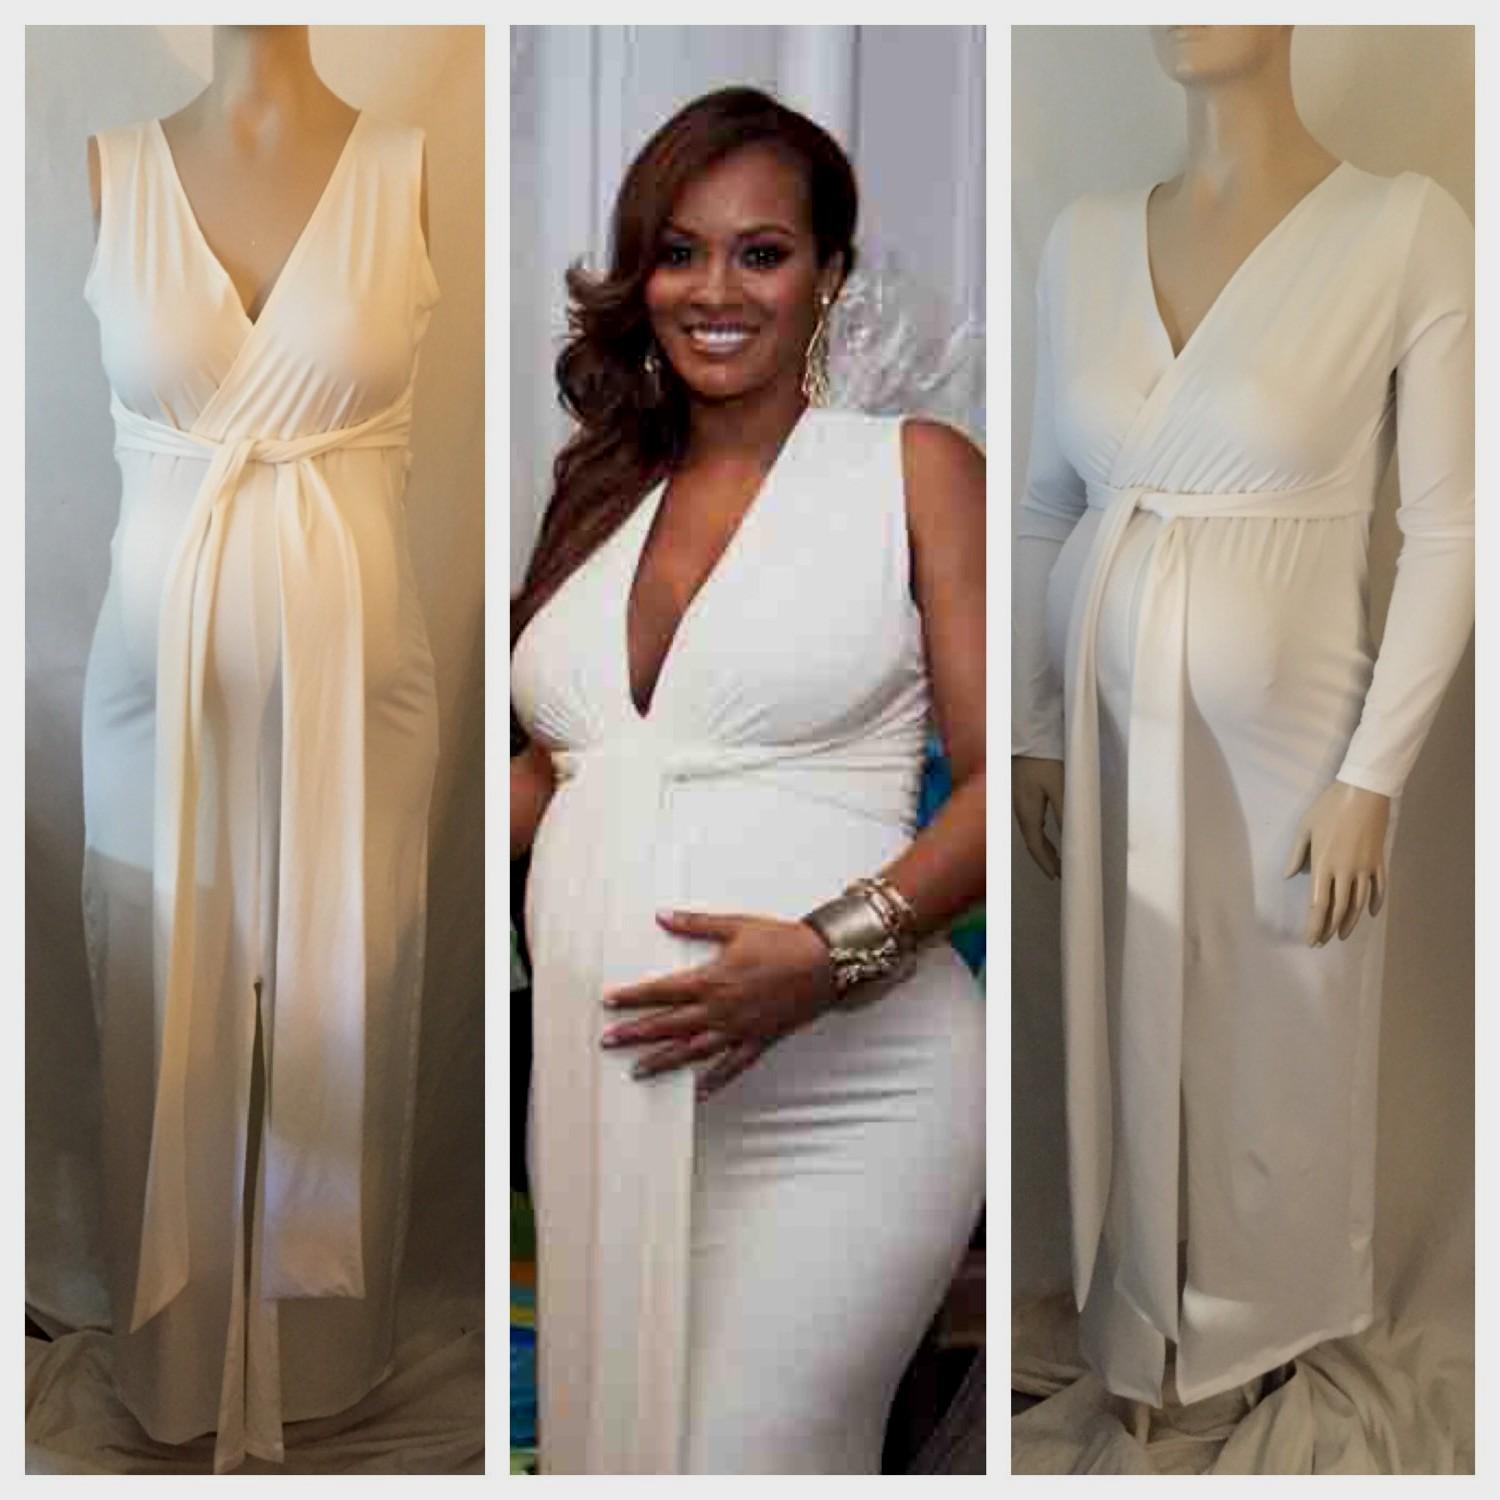 Full Size of Baby Shower:baby Shower Outfits For Dad Baby Shower Outfits For Mom And Dad Baby Shower Outfit For Mom Winter Mom And Dad Shirts For Baby Shower Affordable Maternity Dresses For Baby Shower Long Maternity Dresses For Baby Shower Cheap Plus Size Maternity Clothes Baby Shower Dresses For Fall